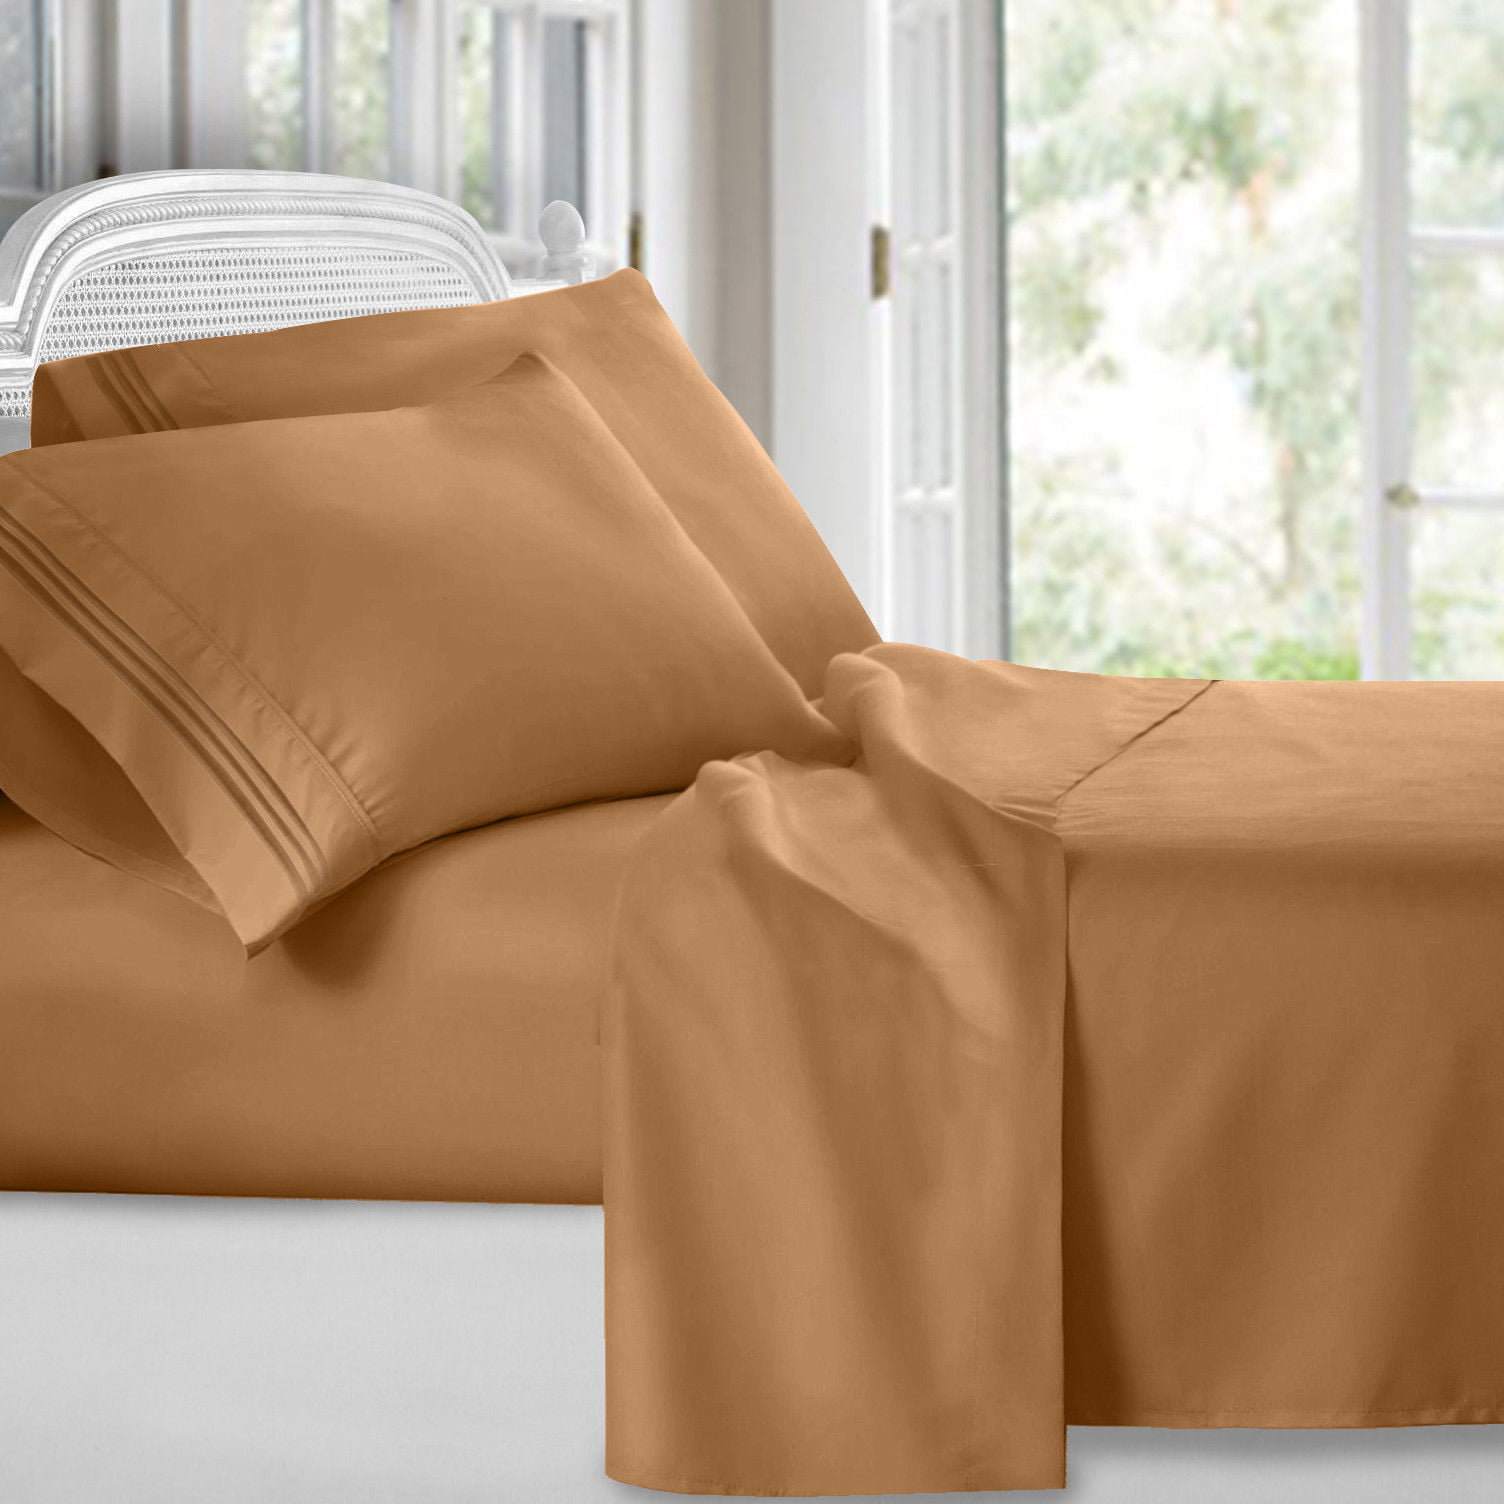 Details about   Egyptian Comfort 1800 Count 4 Piece Deep Pocket Bed Sheets Set Flat Pillowcases 